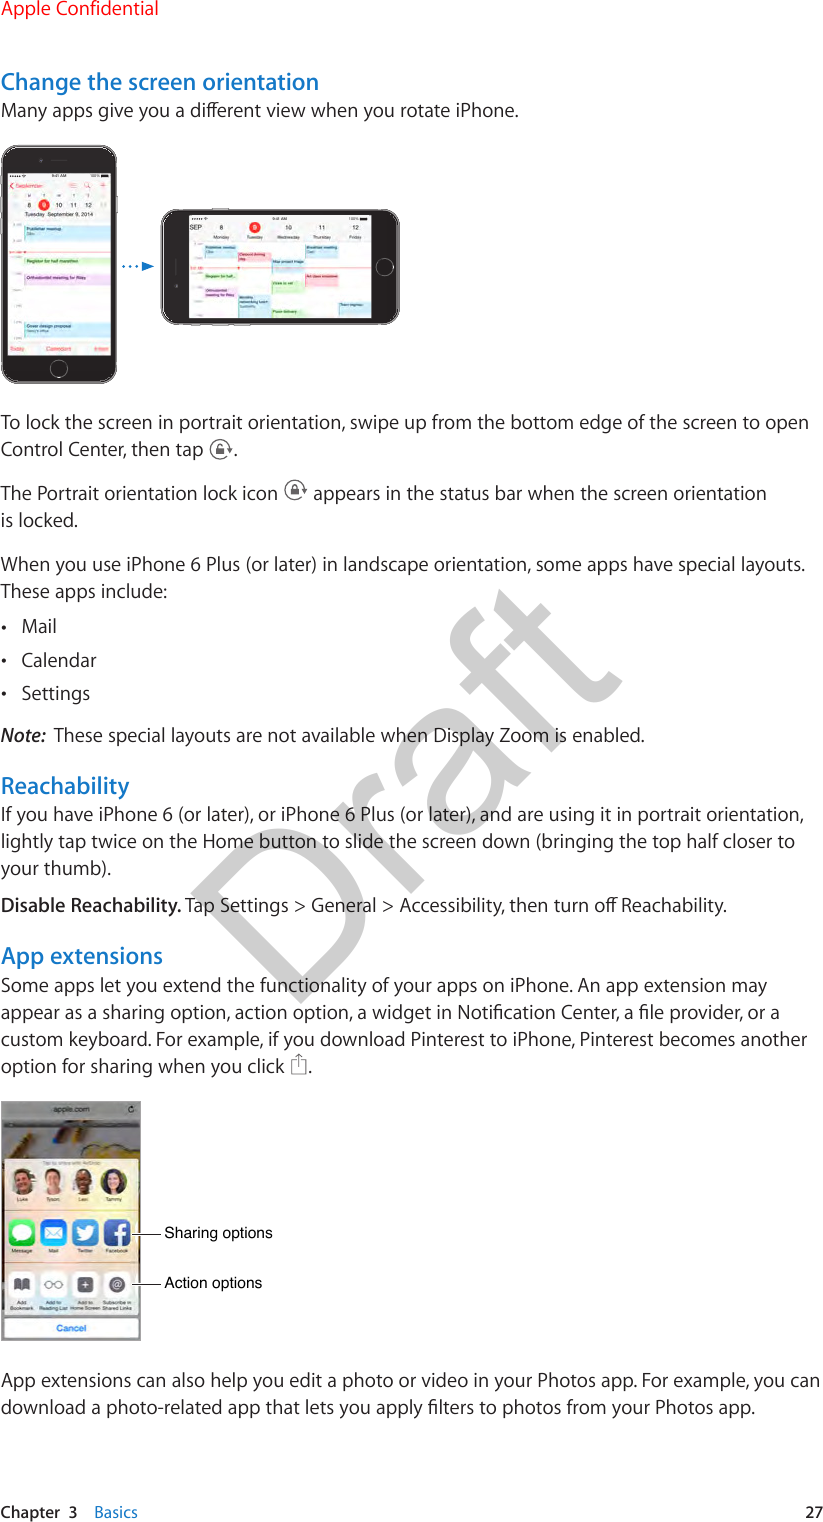 Chapter  3    Basics  27Change the screen orientationMany apps give you a dierent view when you rotate iPhone. 9:41 AM100%9:41 AM100%To lock the screen in portrait orientation, swipe up from the bottom edge of the screen to open Control Center, then tap  .The Portrait orientation lock icon   appears in the status bar when the screen orientation is locked.When you use iPhone 6 Plus (or later) in landscape orientation, some apps have special layouts. These apps include: •Mail •Calendar •SettingsNote:  These special layouts are not available when Display Zoom is enabled.ReachabilityIf you have iPhone 6 (or later), or iPhone 6 Plus (or later), and are using it in portrait orientation, lightly tap twice on the Home button to slide the screen down (bringing the top half closer to your thumb).Disable Reachability. Tap Settings &gt; General &gt; Accessibility, then turn o Reachability.App extensionsSome apps let you extend the functionality of your apps on iPhone. An app extension may appear as a sharing option, action option, a widget in Notication Center, a le provider, or a custom keyboard. For example, if you download Pinterest to iPhone, Pinterest becomes another option for sharing when you click  .Sharing optionsSharing optionsAction optionsAction optionsApp extensions can also help you edit a photo or video in your Photos app. For example, you can download a photo-related app that lets you apply lters to photos from your Photos app.Apple ConfidentialDraft